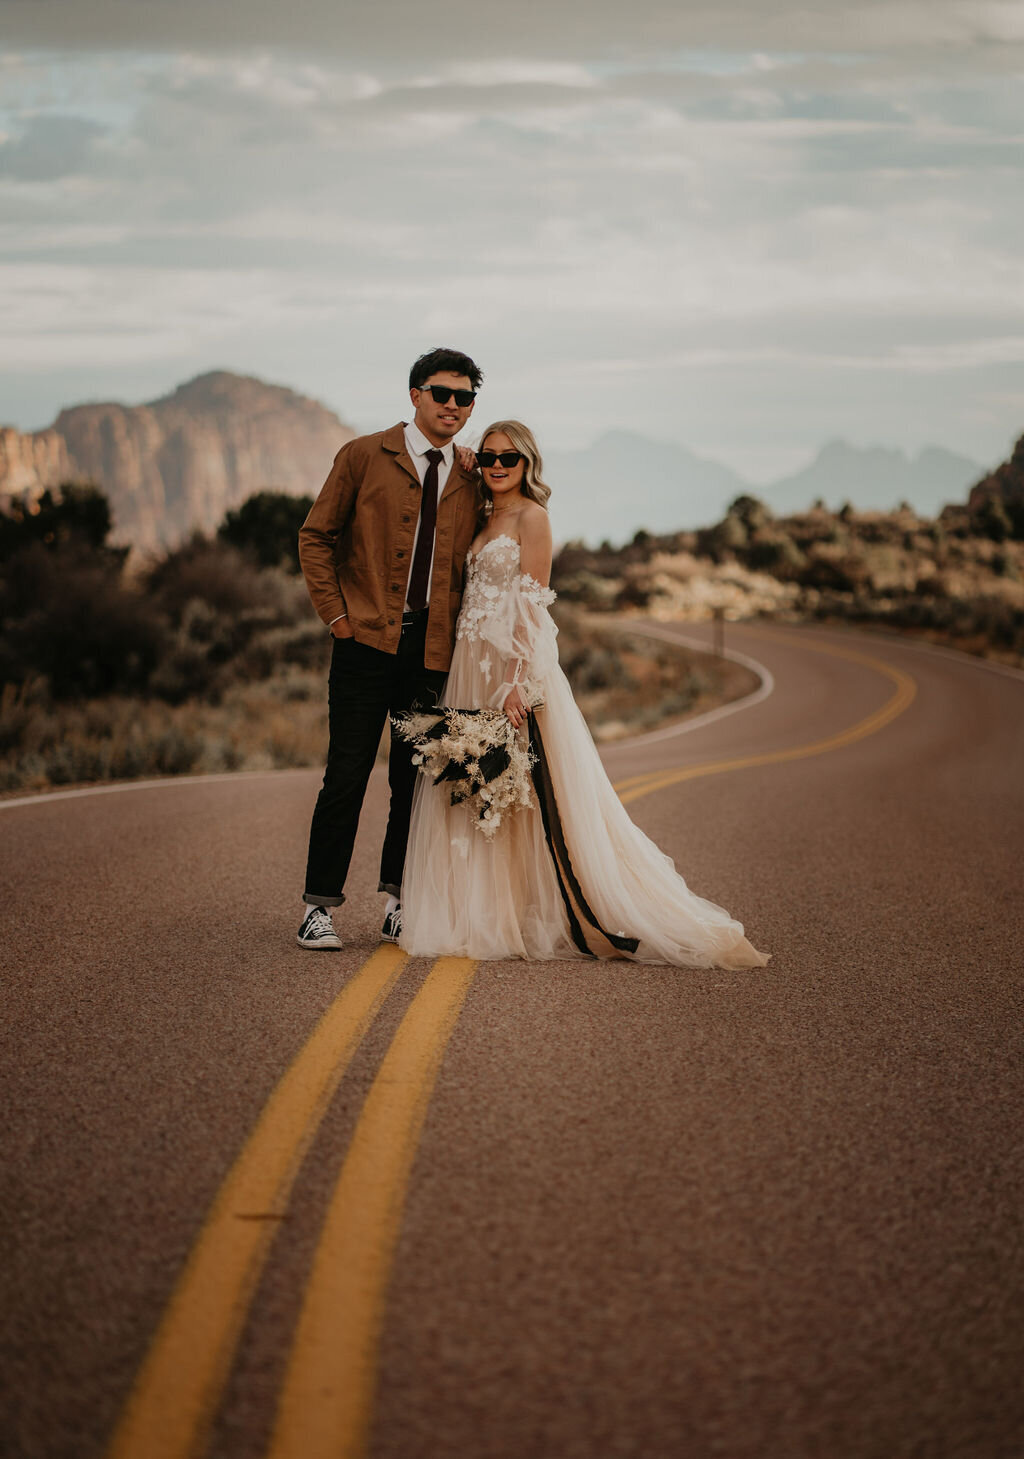 Bride and groom standing in road with sunglasses